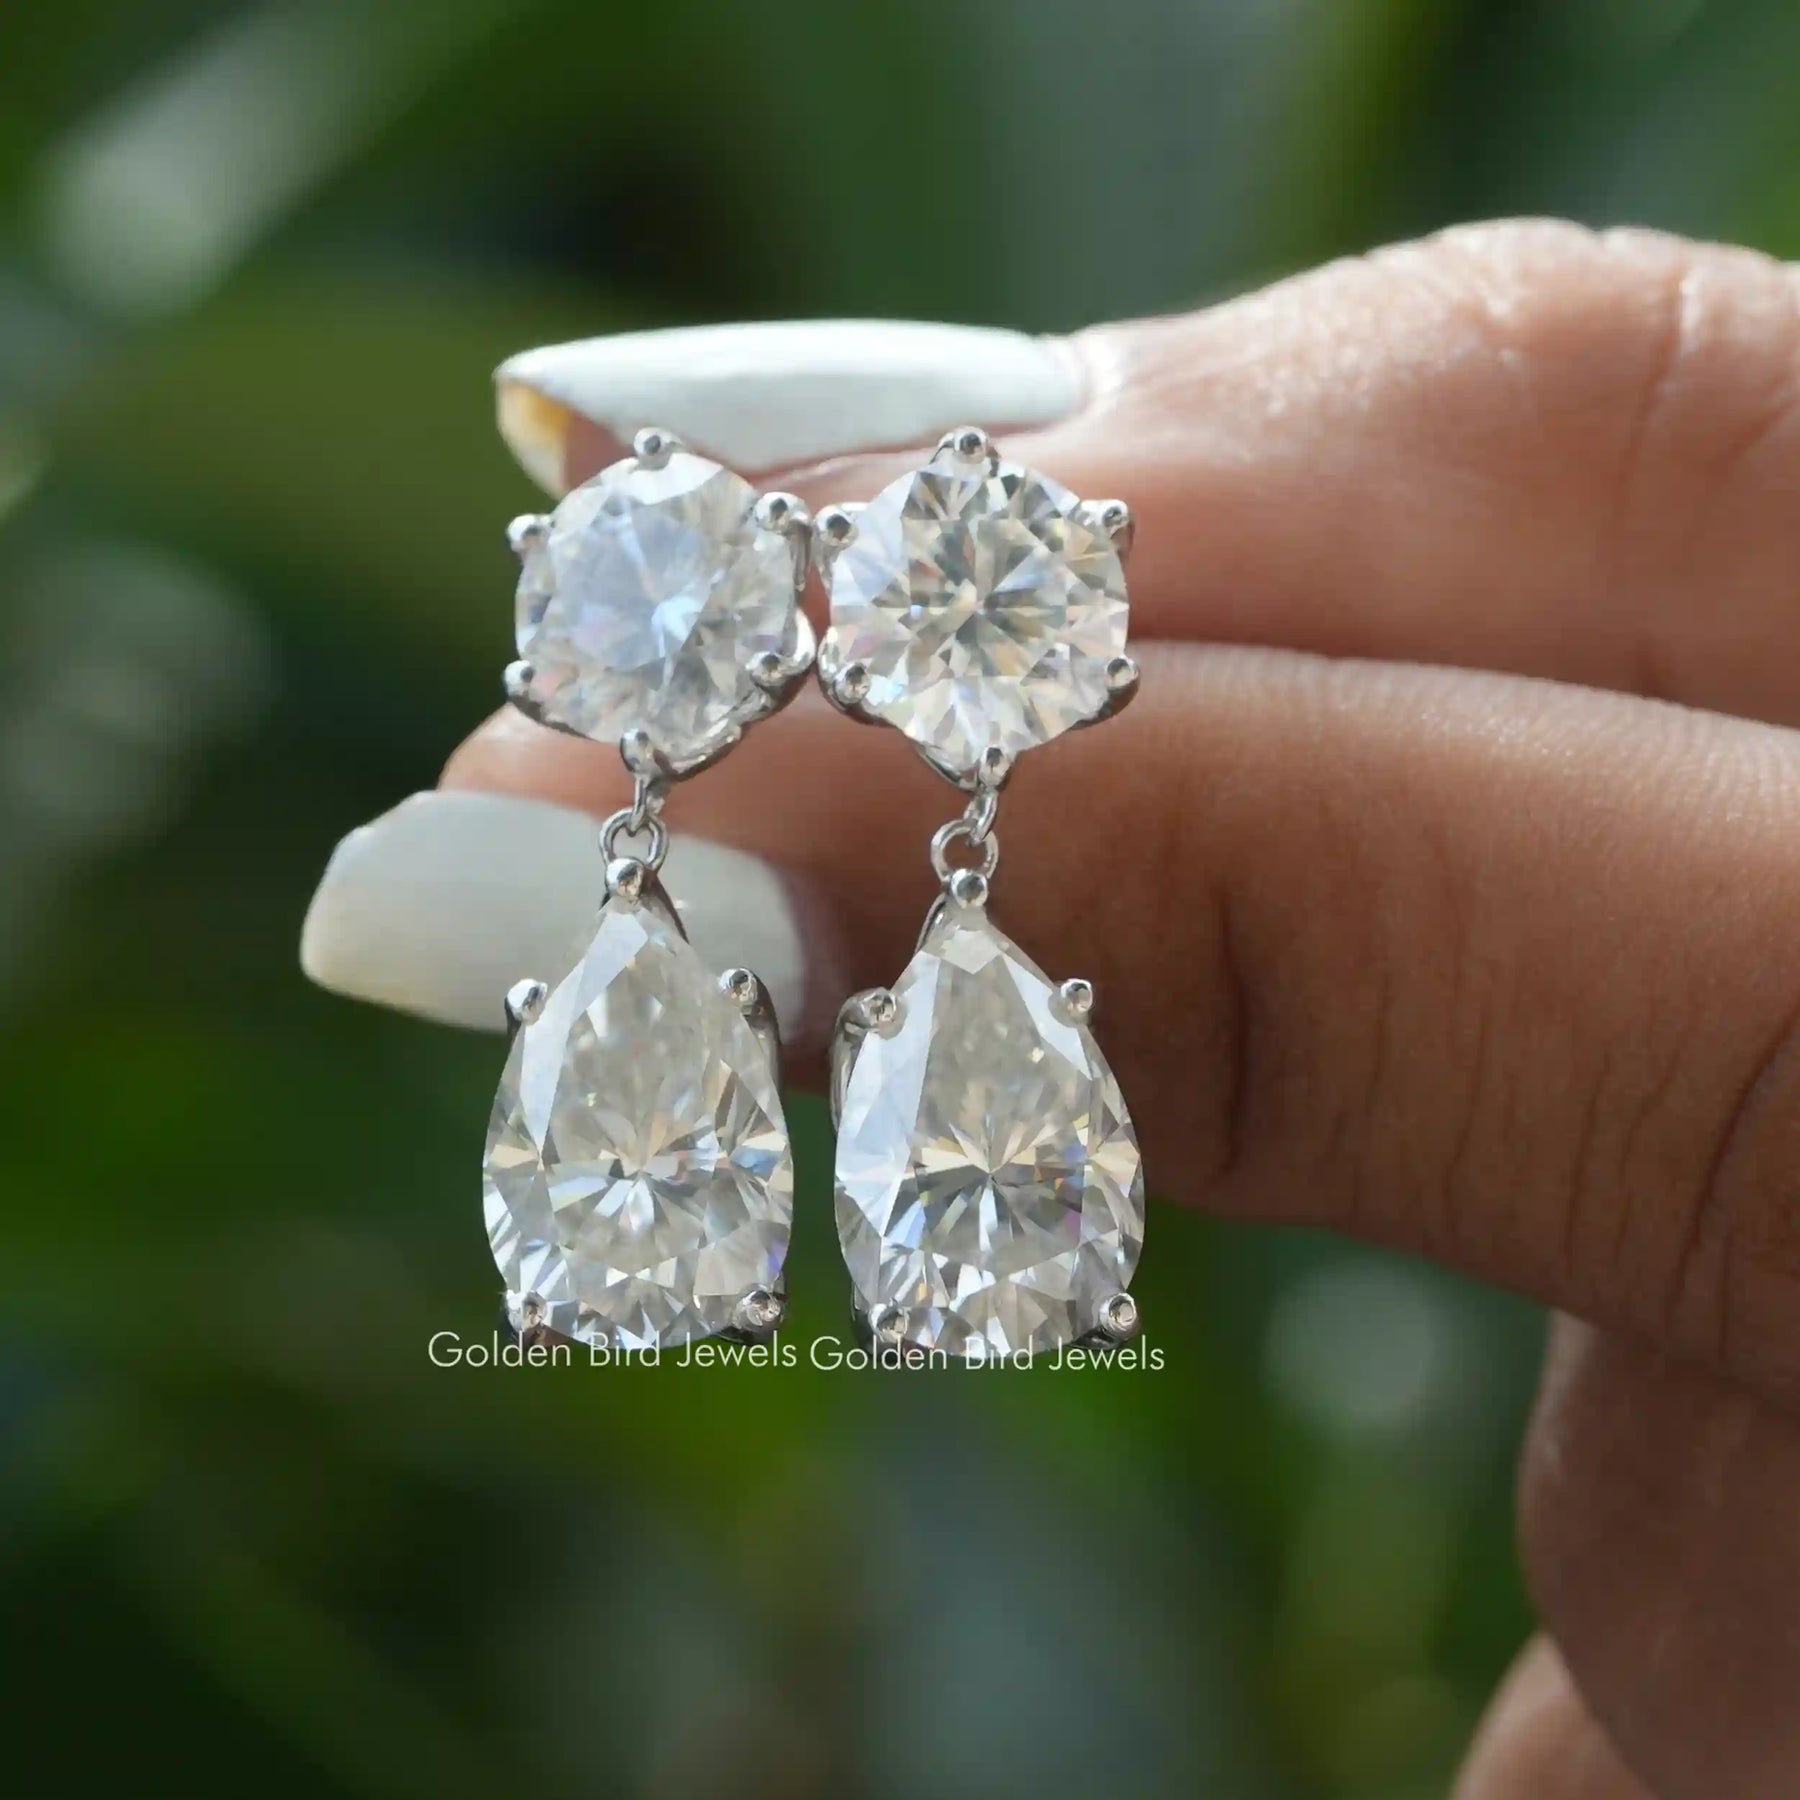 [This earrings made of pear and round cut stones in 14k white gold]-[Golden Bird Jewels]